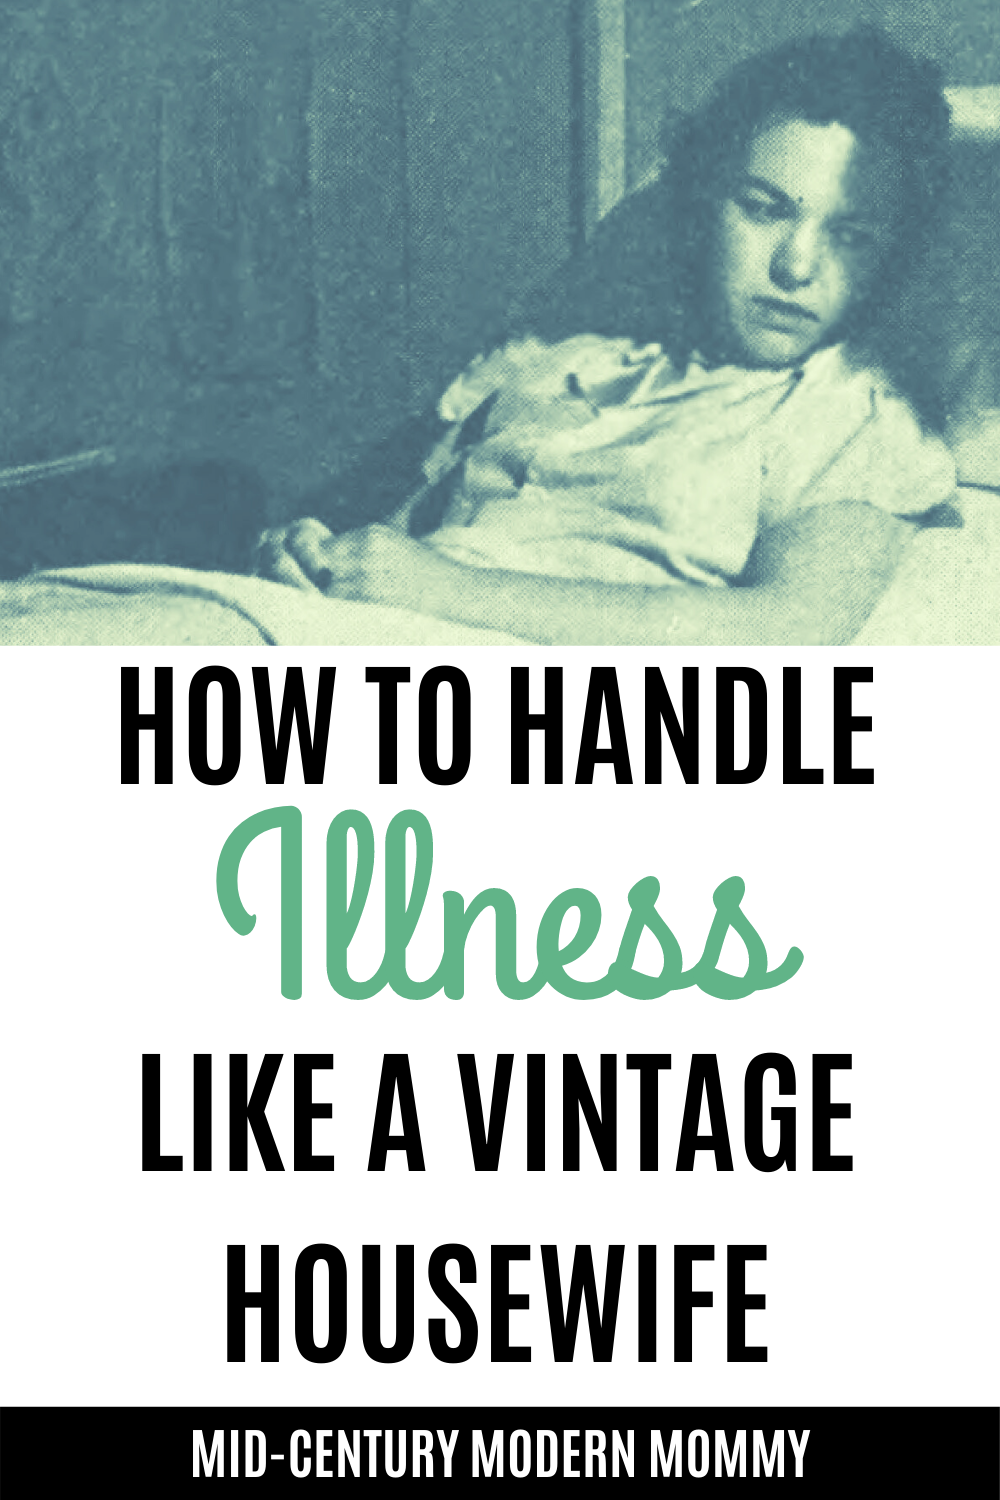 How to Handle Illness as a Vintage Housewife over an image of a housewife on bedrest